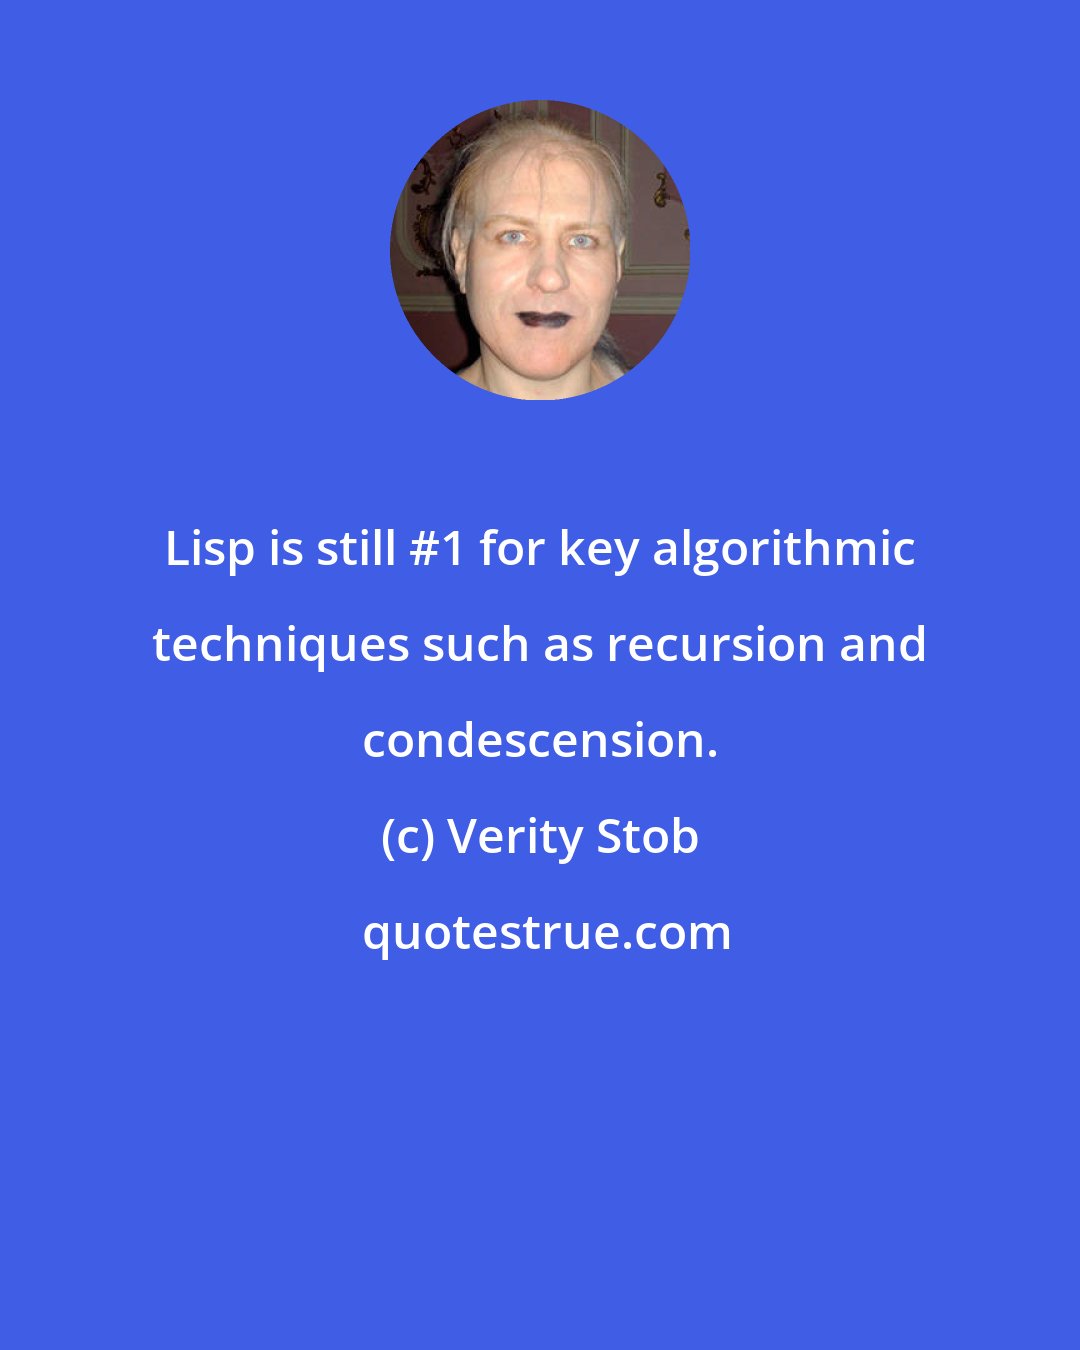 Verity Stob: Lisp is still #1 for key algorithmic techniques such as recursion and condescension.